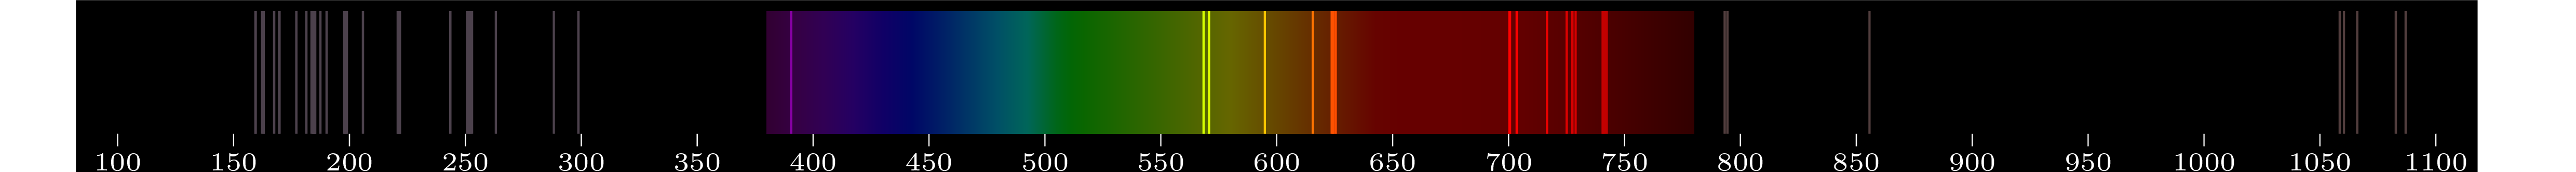 emmision spectra of element Si